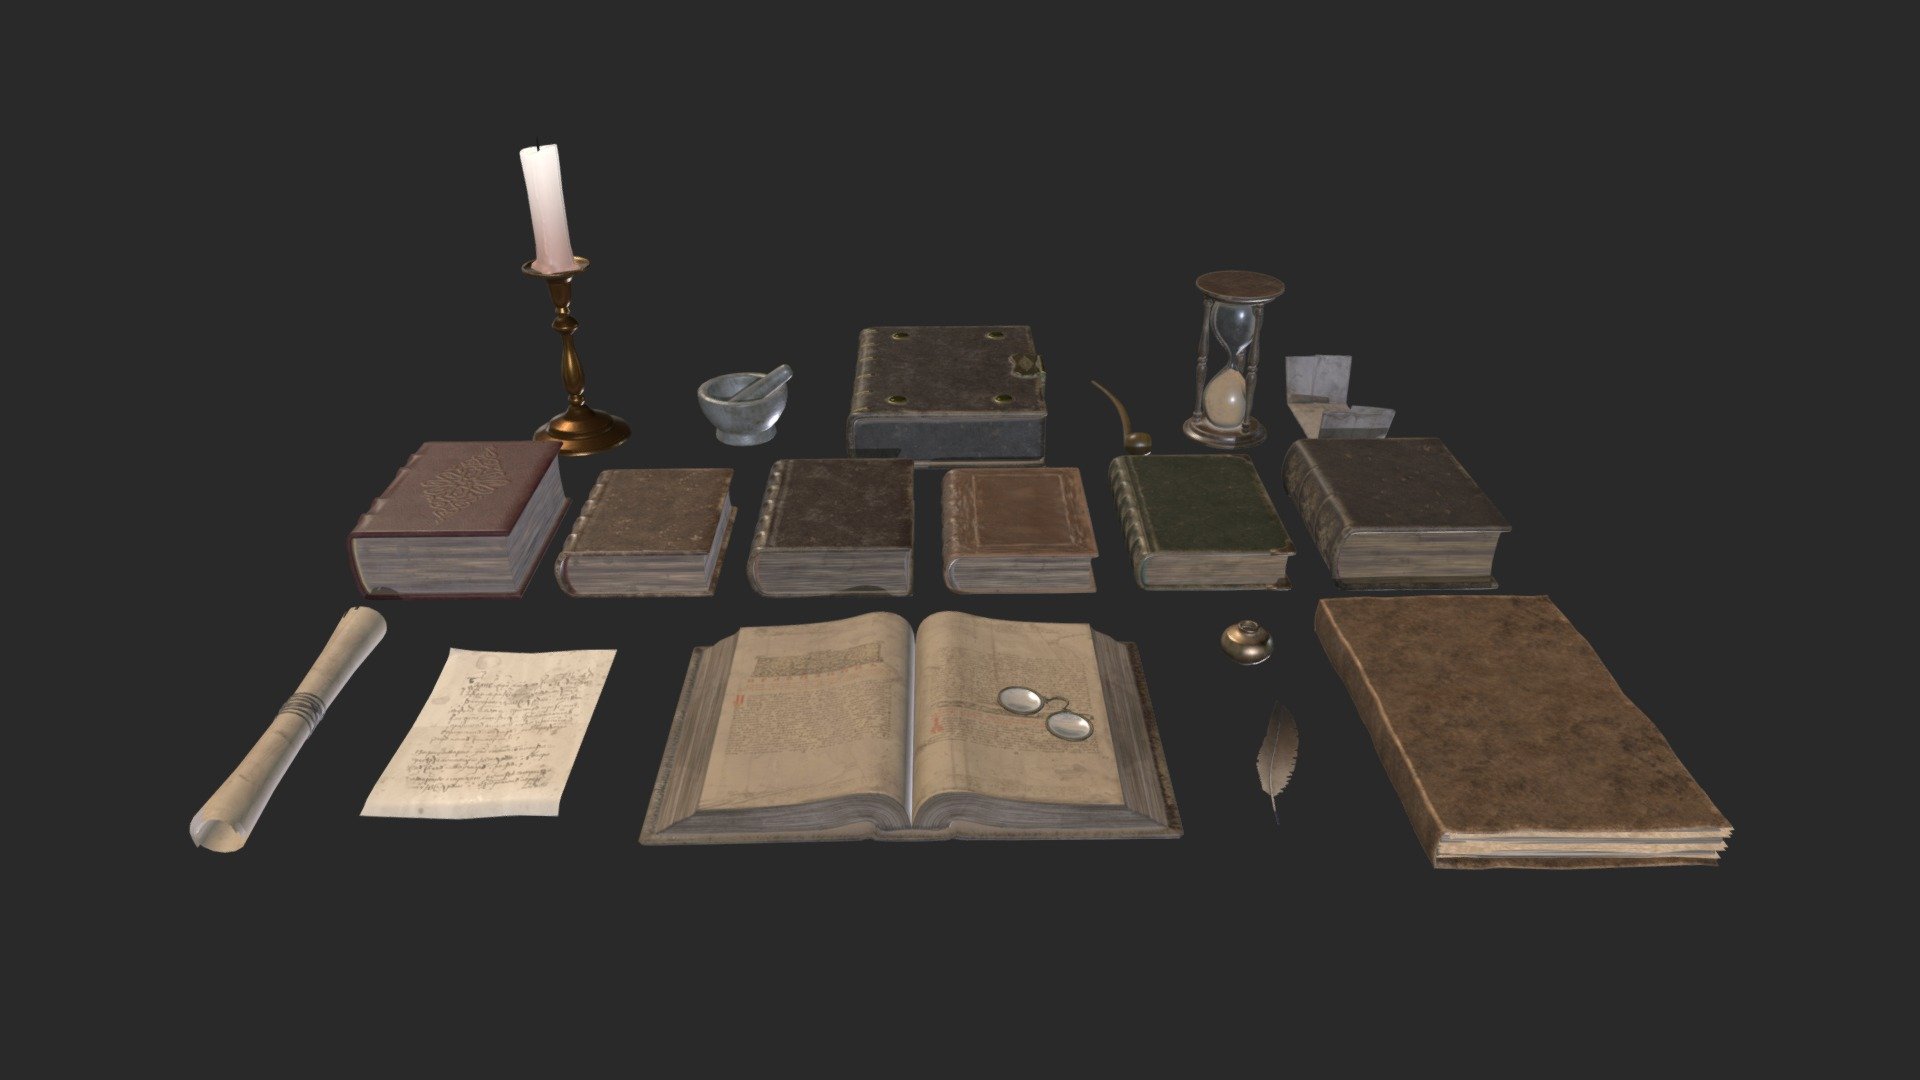 Collection of low poly library supplies: 19 items in total. Ready for game.

Texture resolution: 512x512, 1024x1024, 2048x2048.

Unwrapped UVs: Non-overlapping 3d model